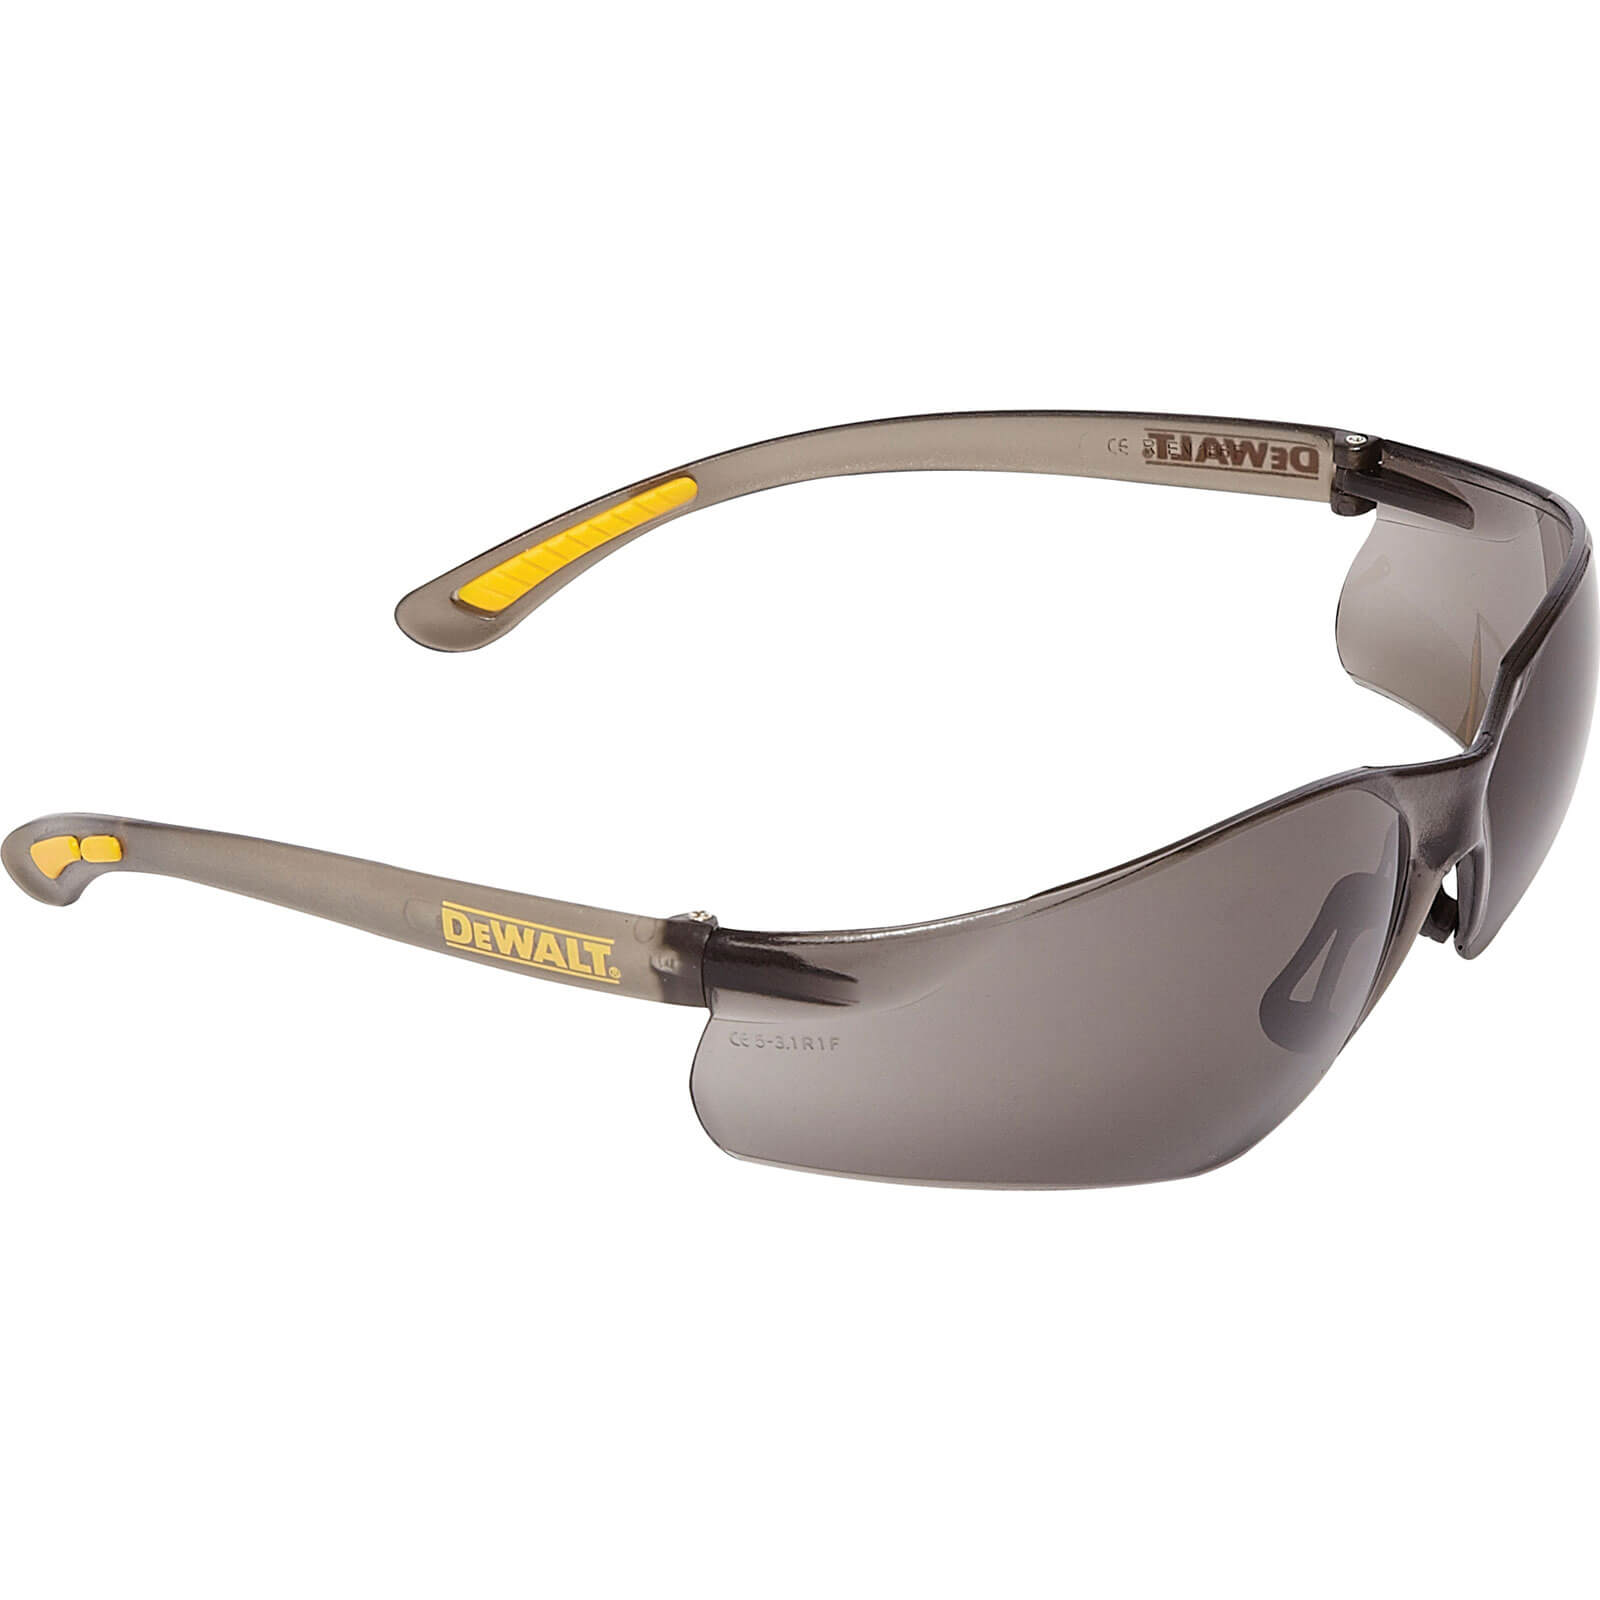 Image of DeWalt Contractor Pro Safety Glasses Smoke